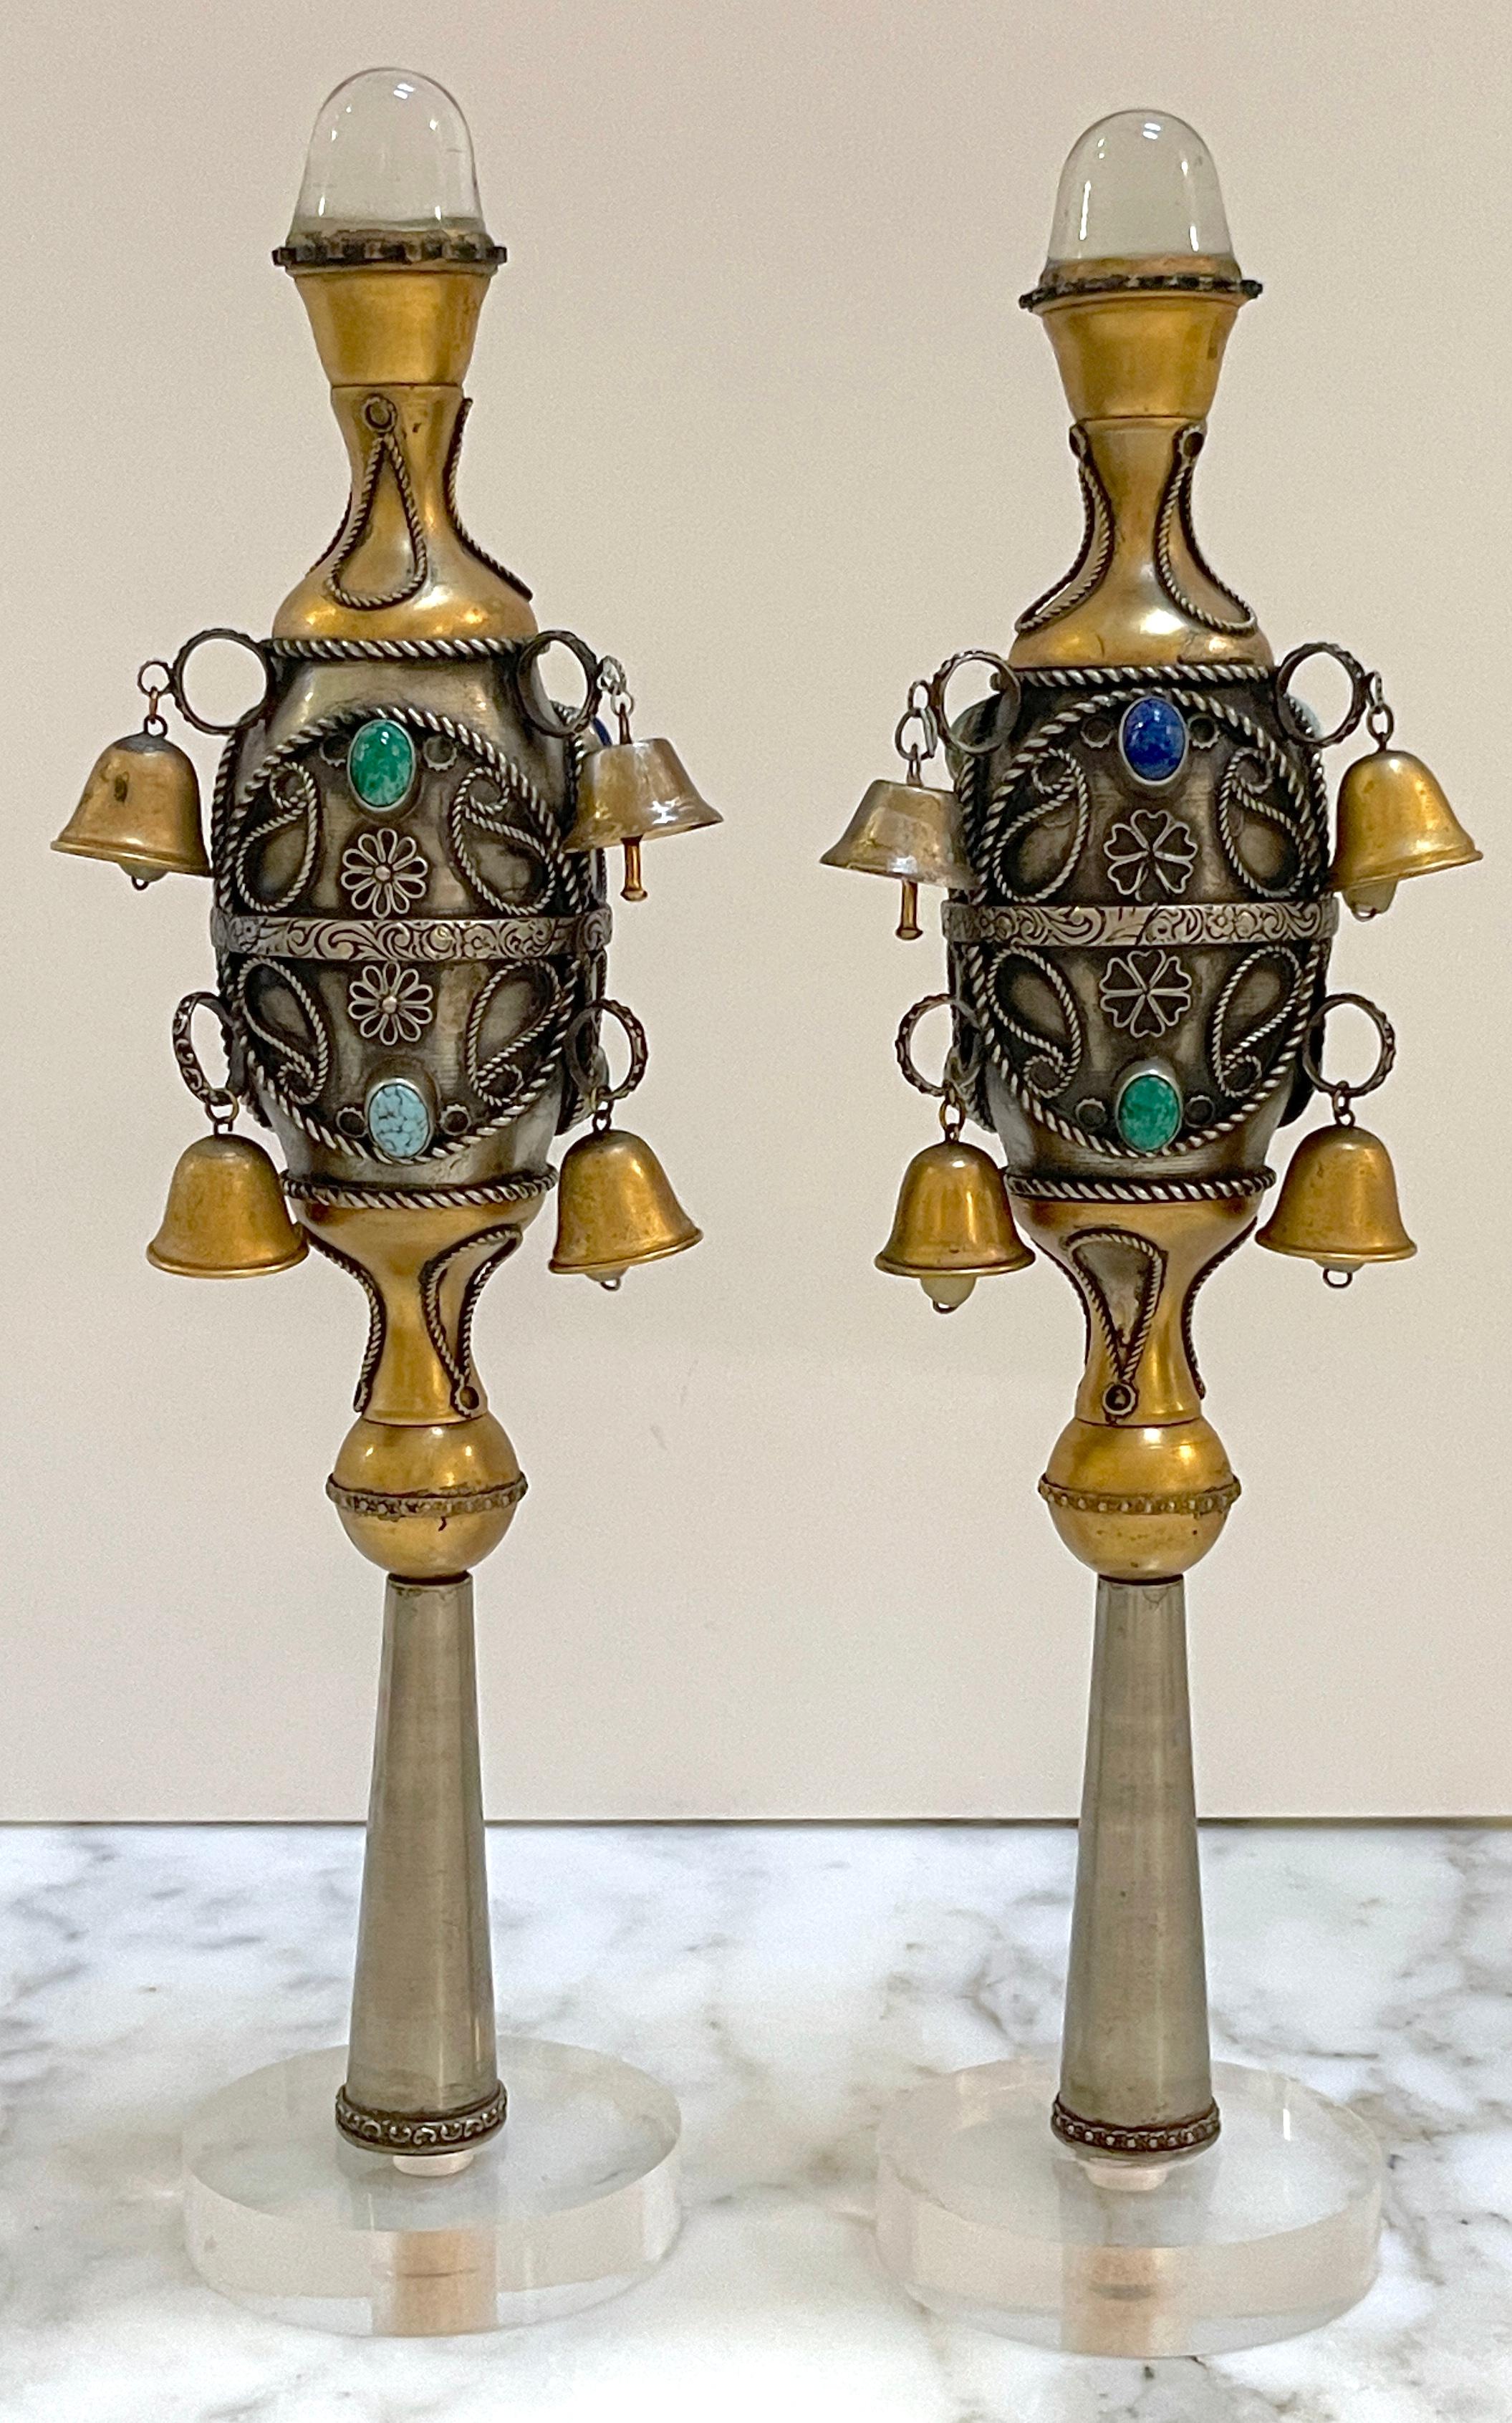 Pair Rock Crystal Gem Stone, Silver & Gilt 8 Bell Judaica Torah/ Rimonim Finials
European, 1900s
We are pleased to offer this stunning pair of European Judaica Torah/Rimonim Finials from the 1900s, featuring exquisite workmanship and artistry.